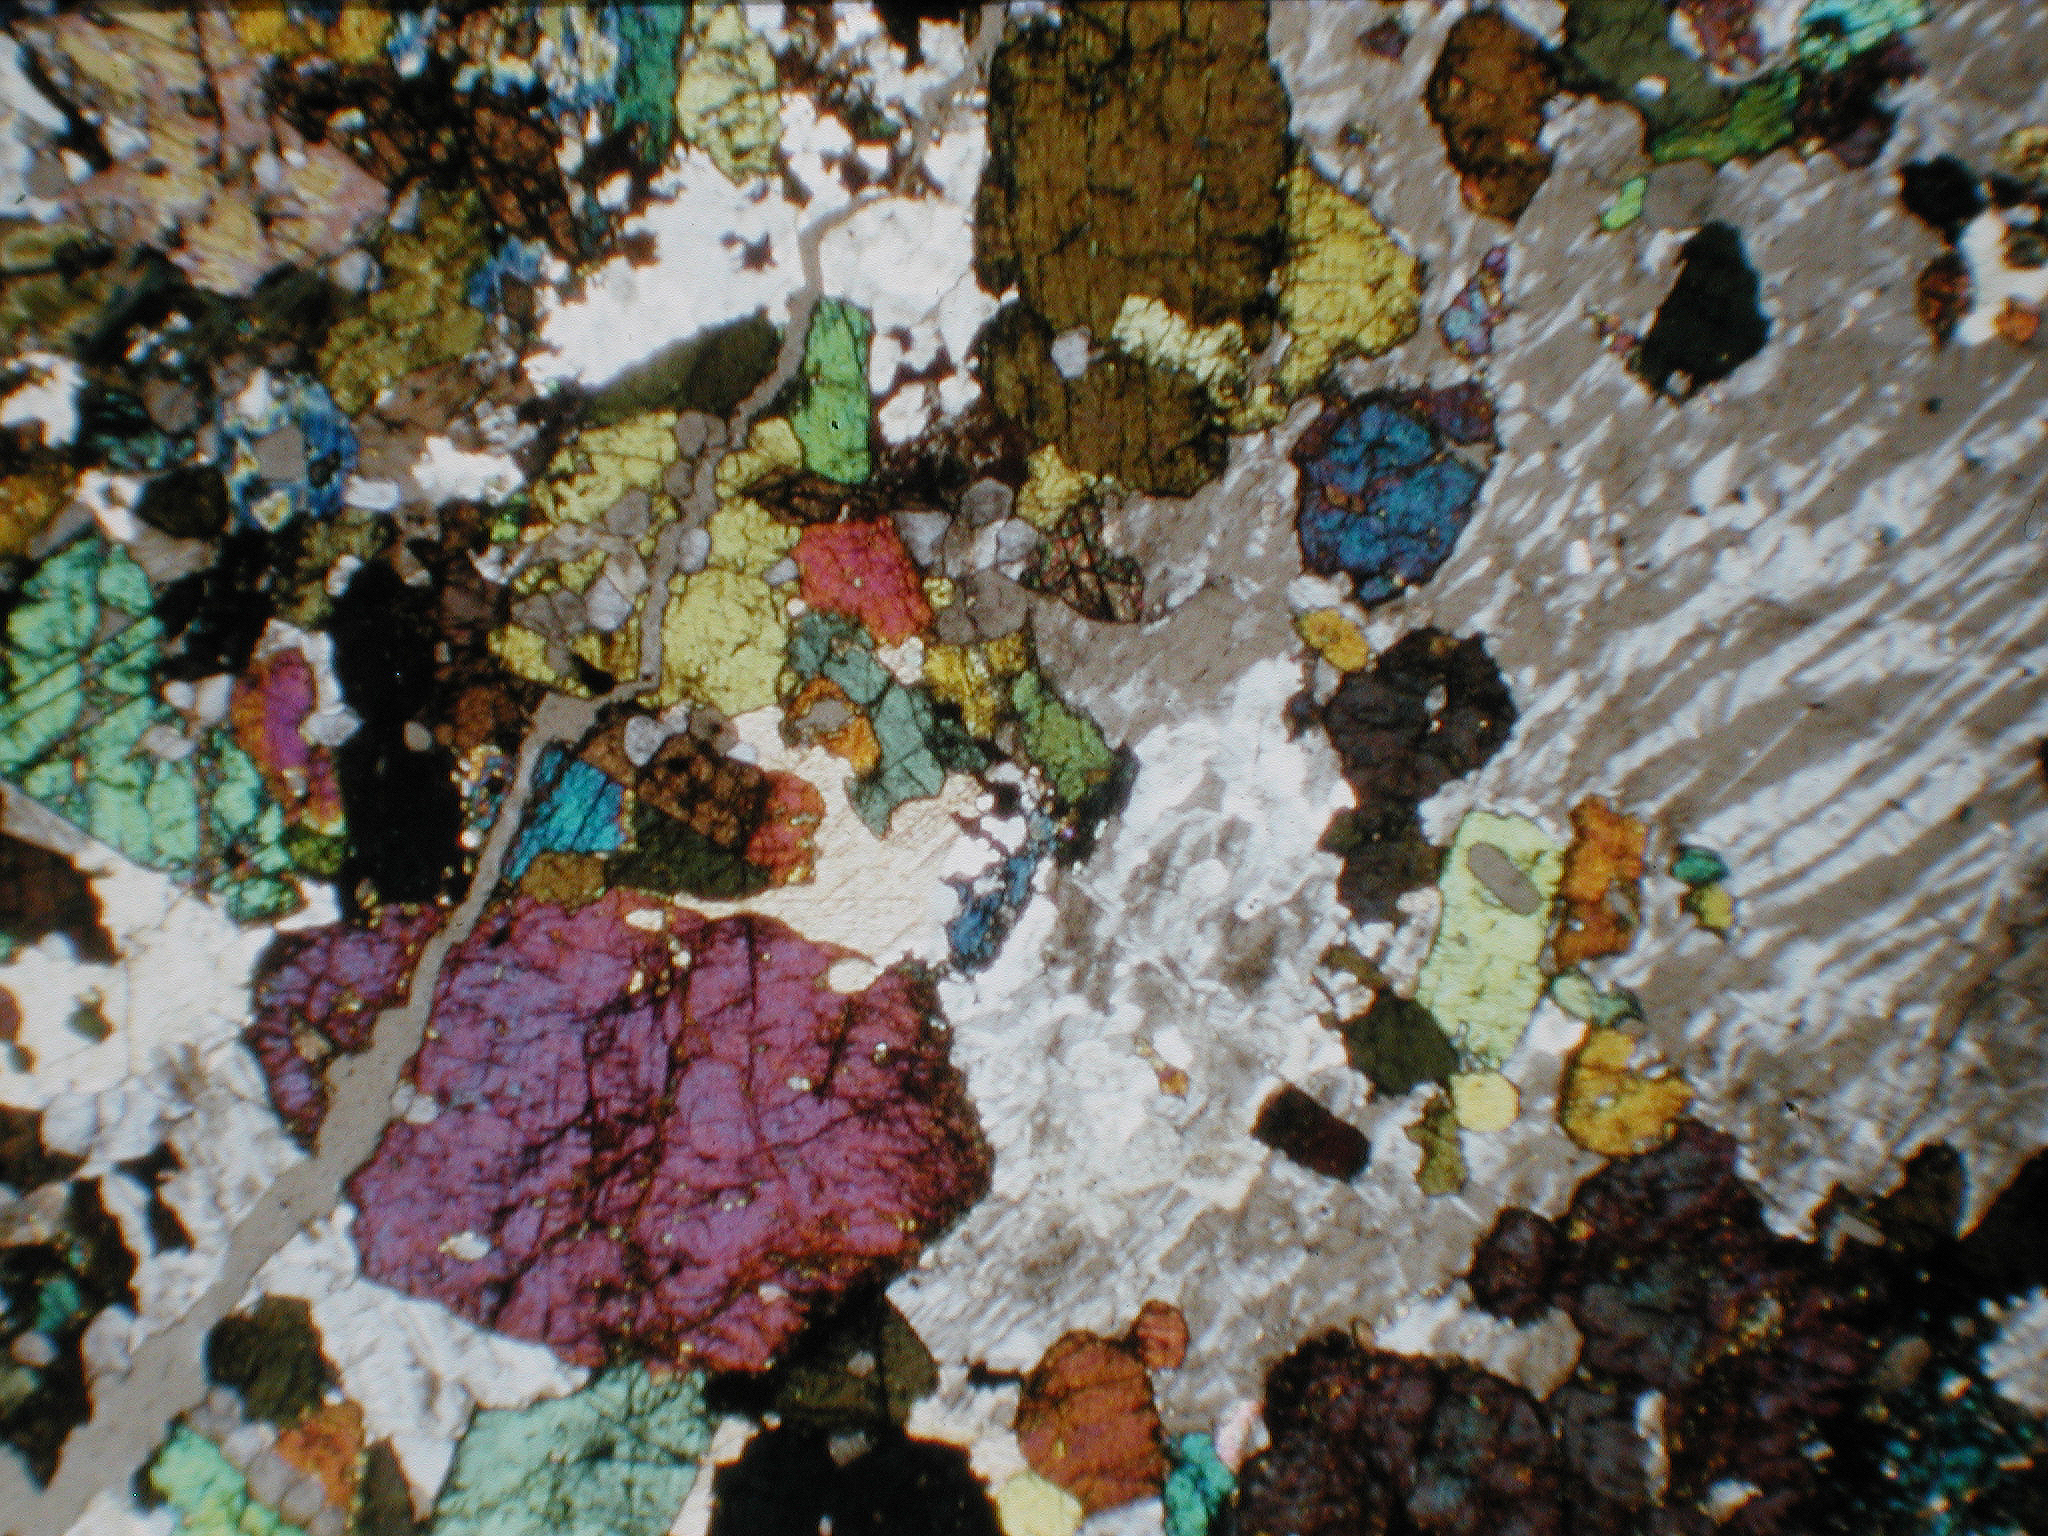 Thin section image in cross-polarized light under a microscope.